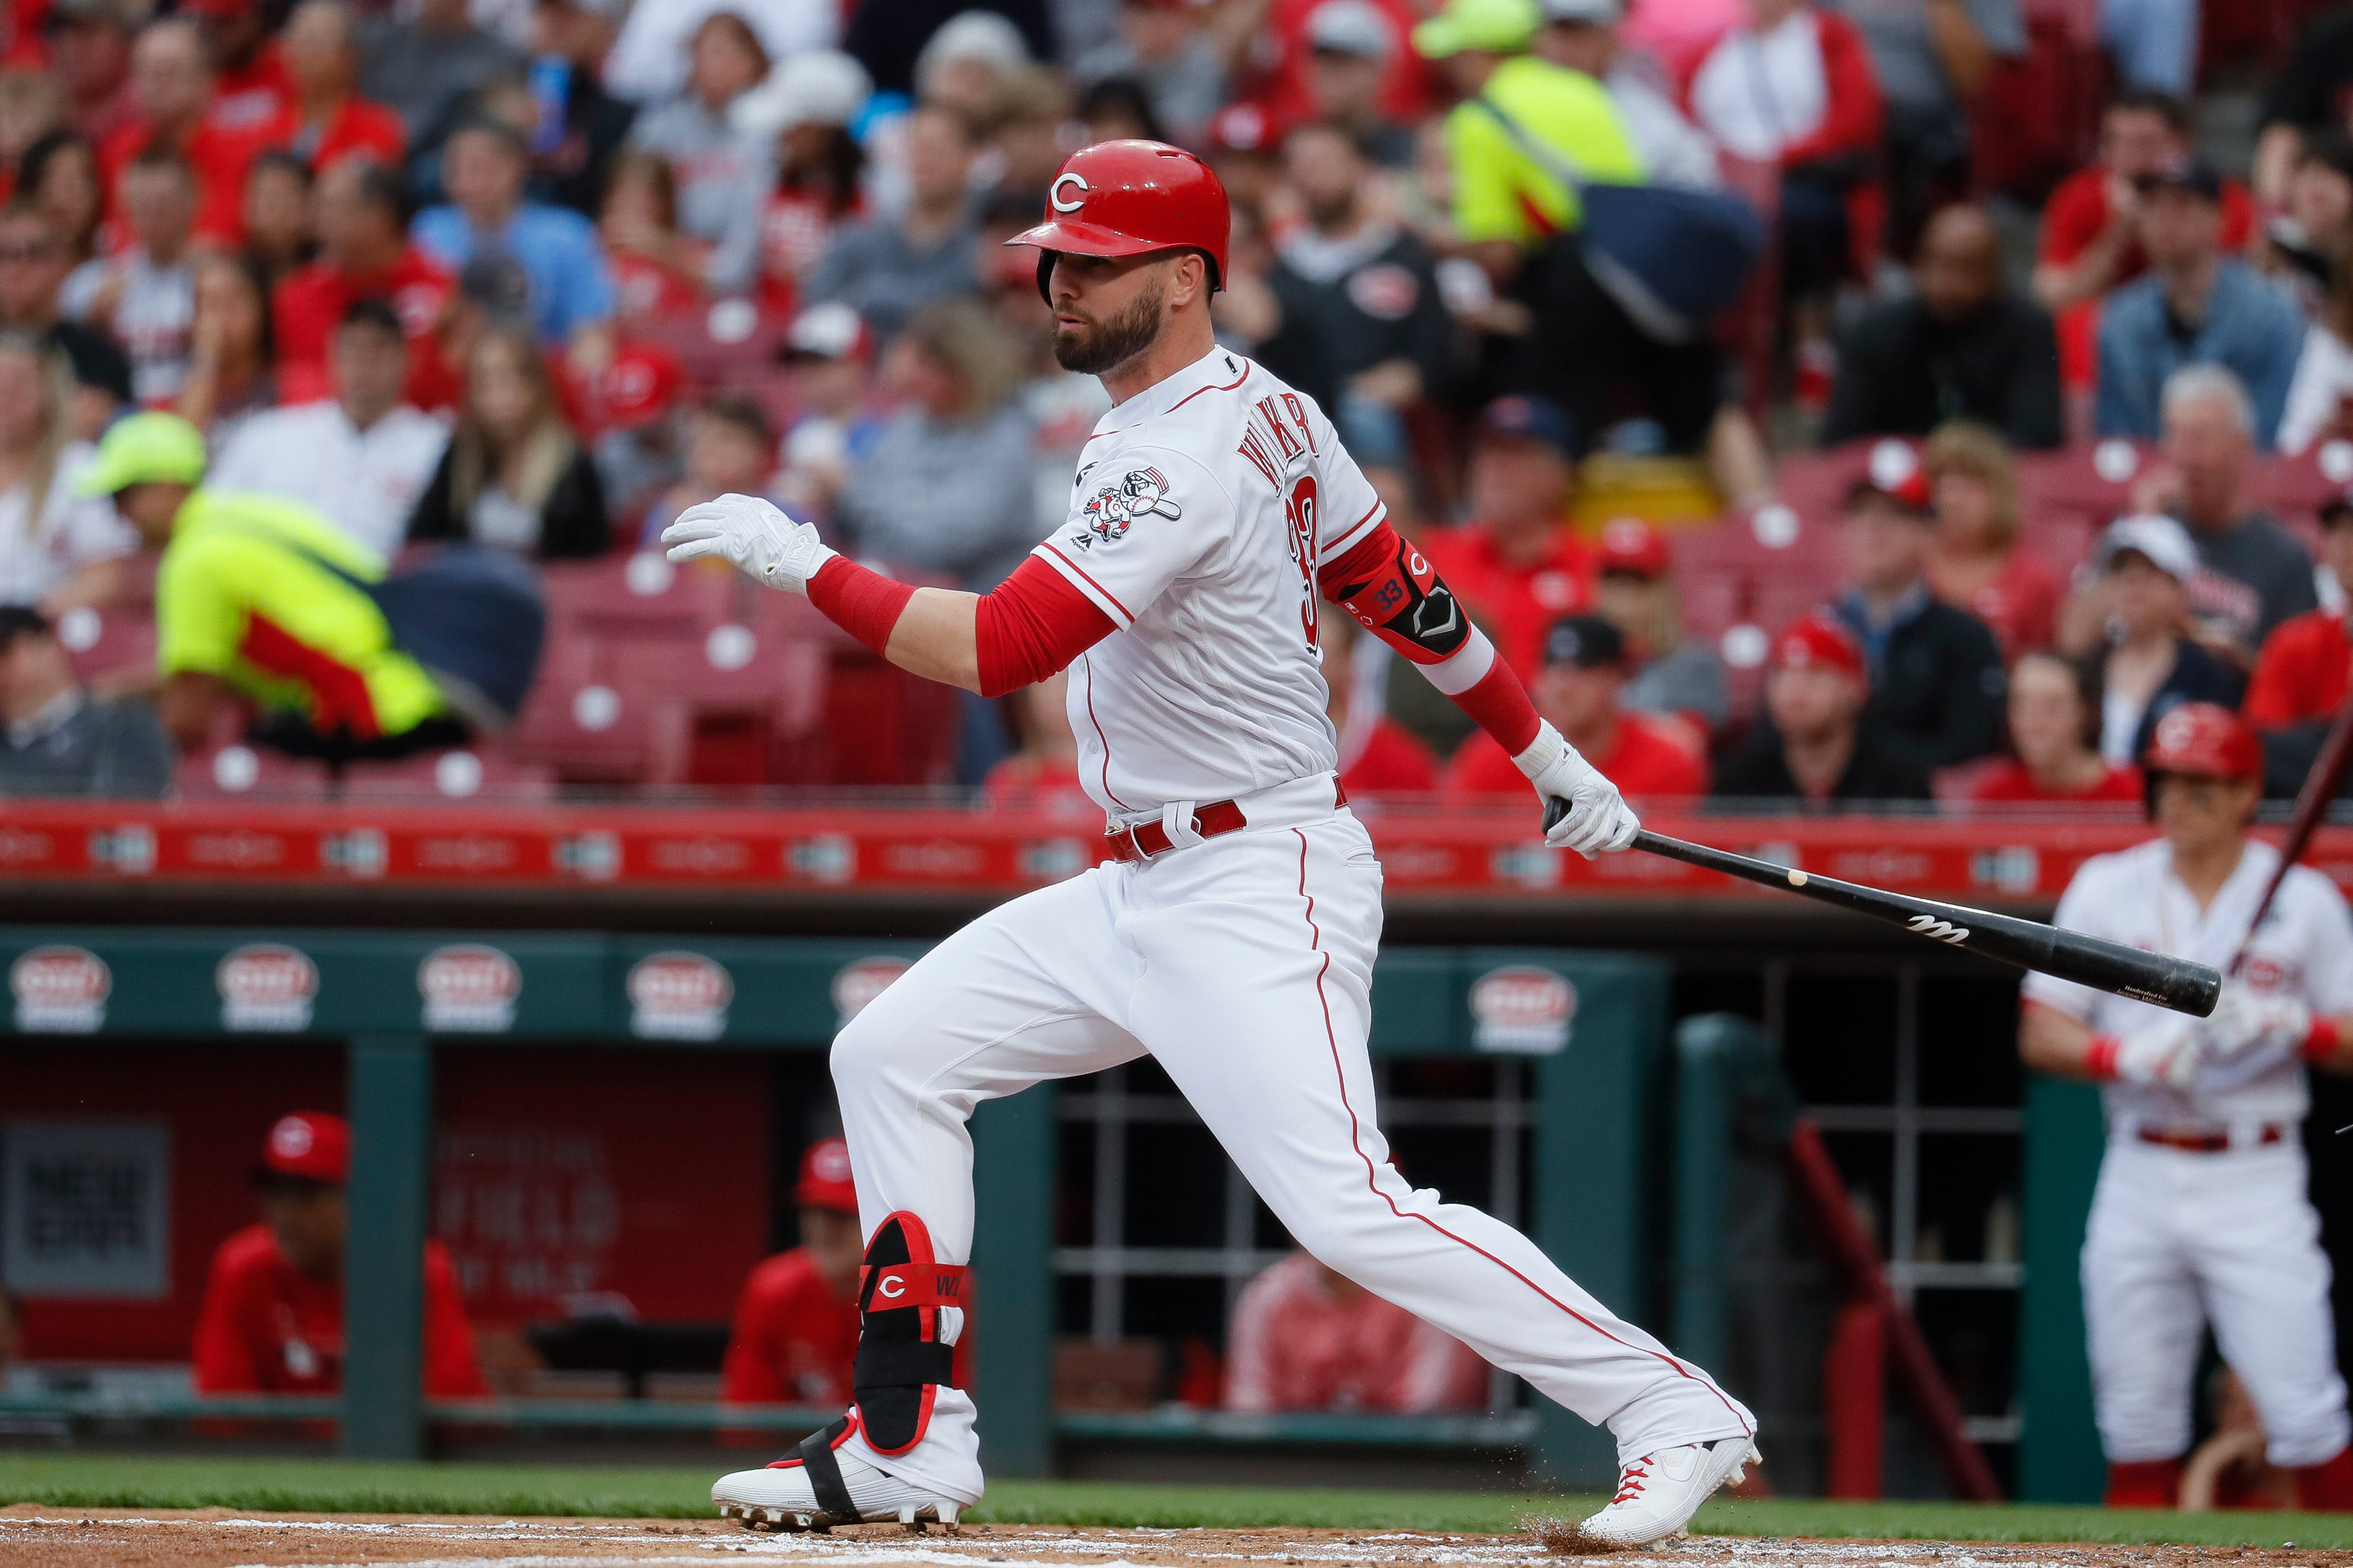 Reds' Jesse Winker strikes out and gives pitcher a thumbs up